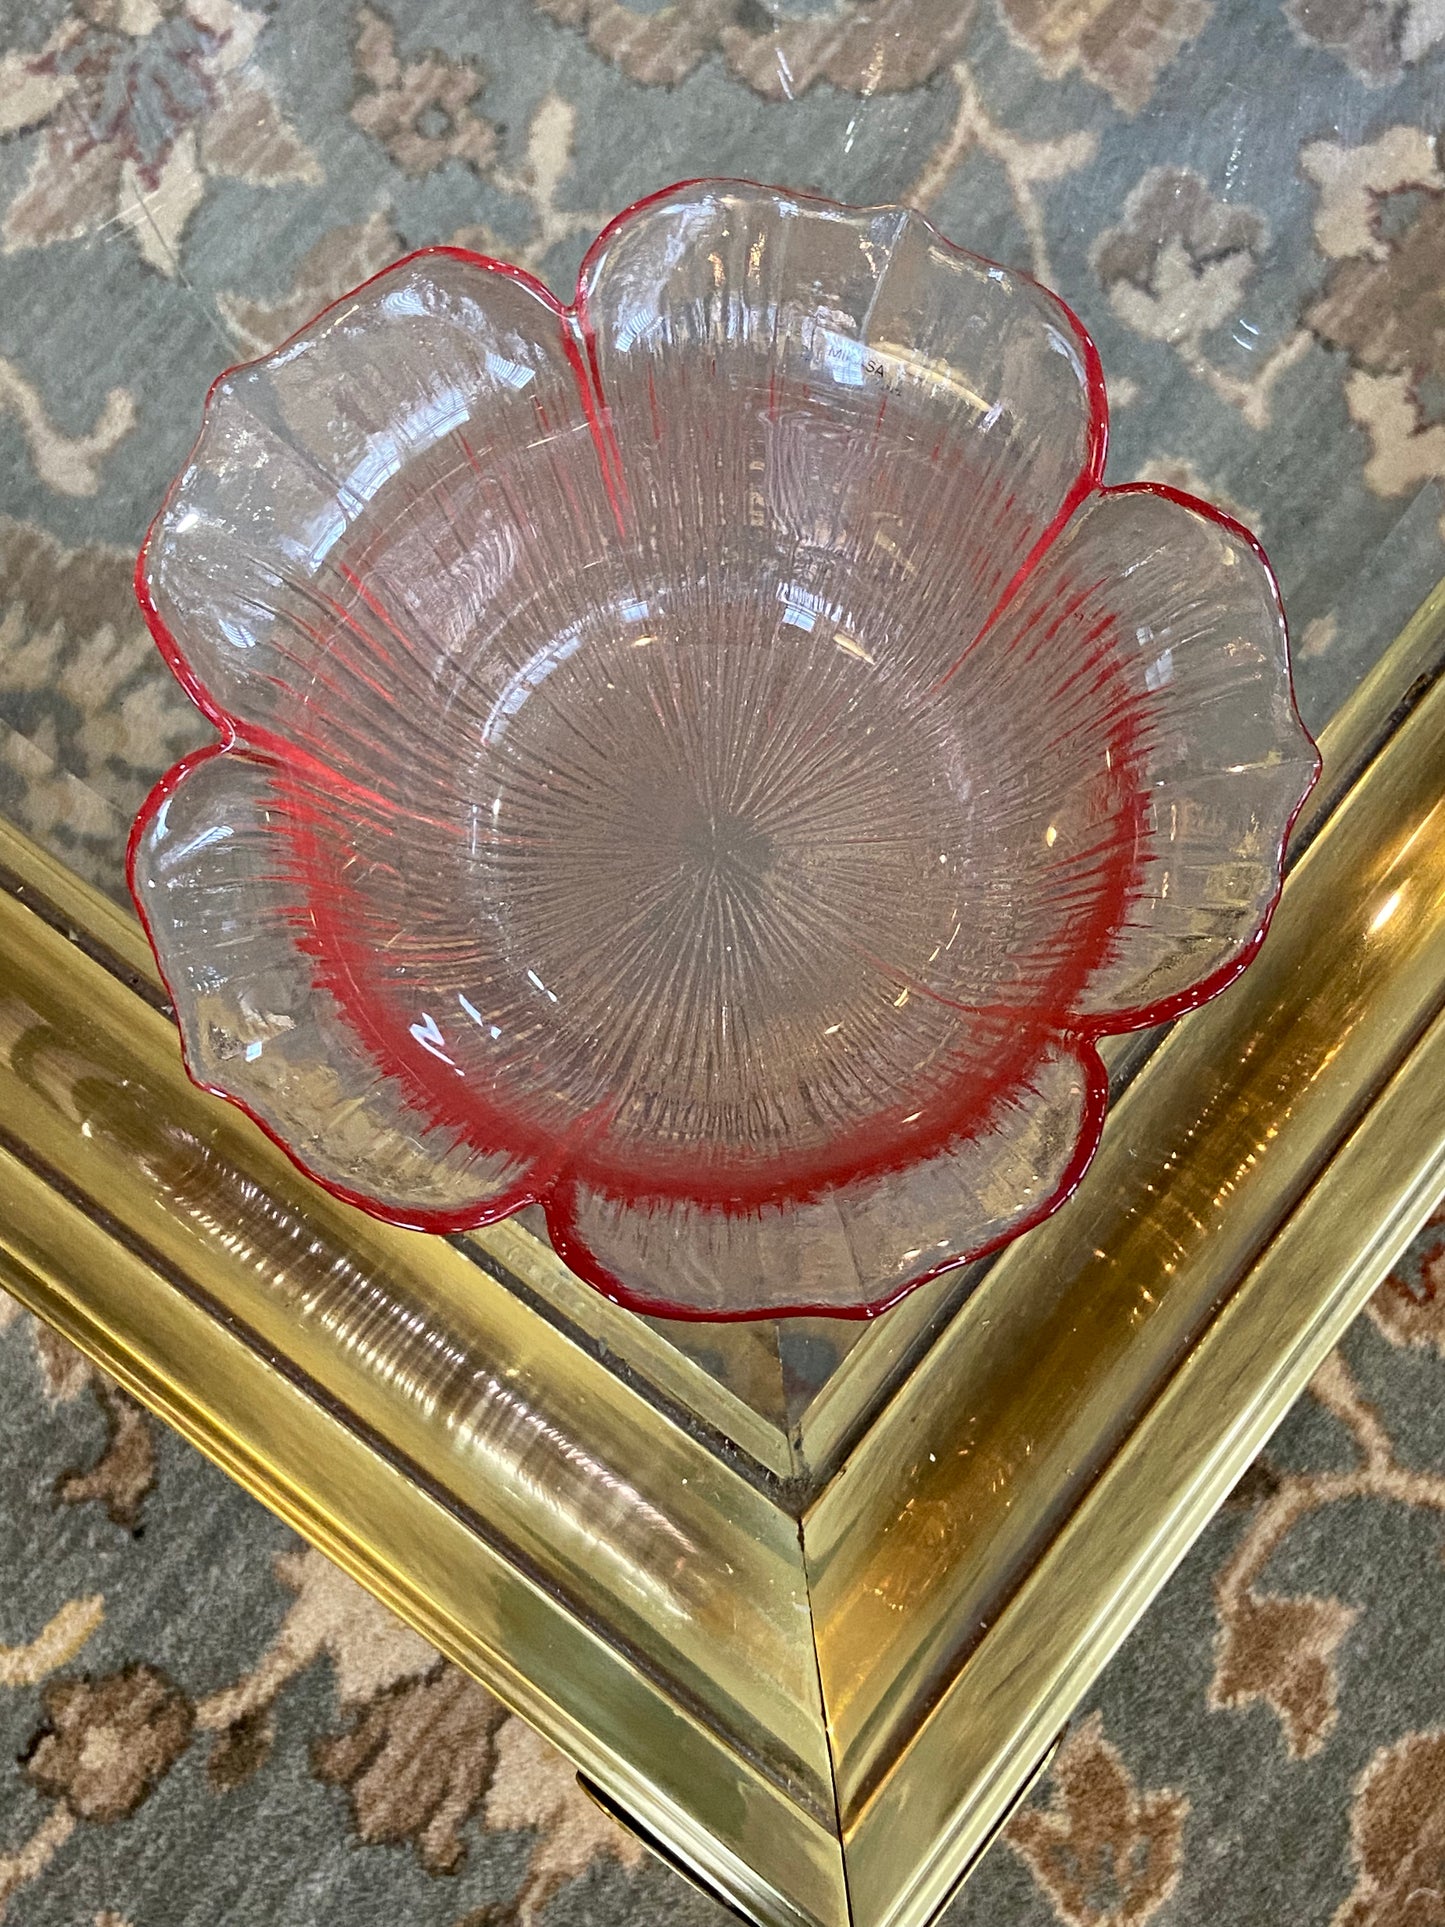 Pair of perfectly pink glass flower dishes by Mikasa